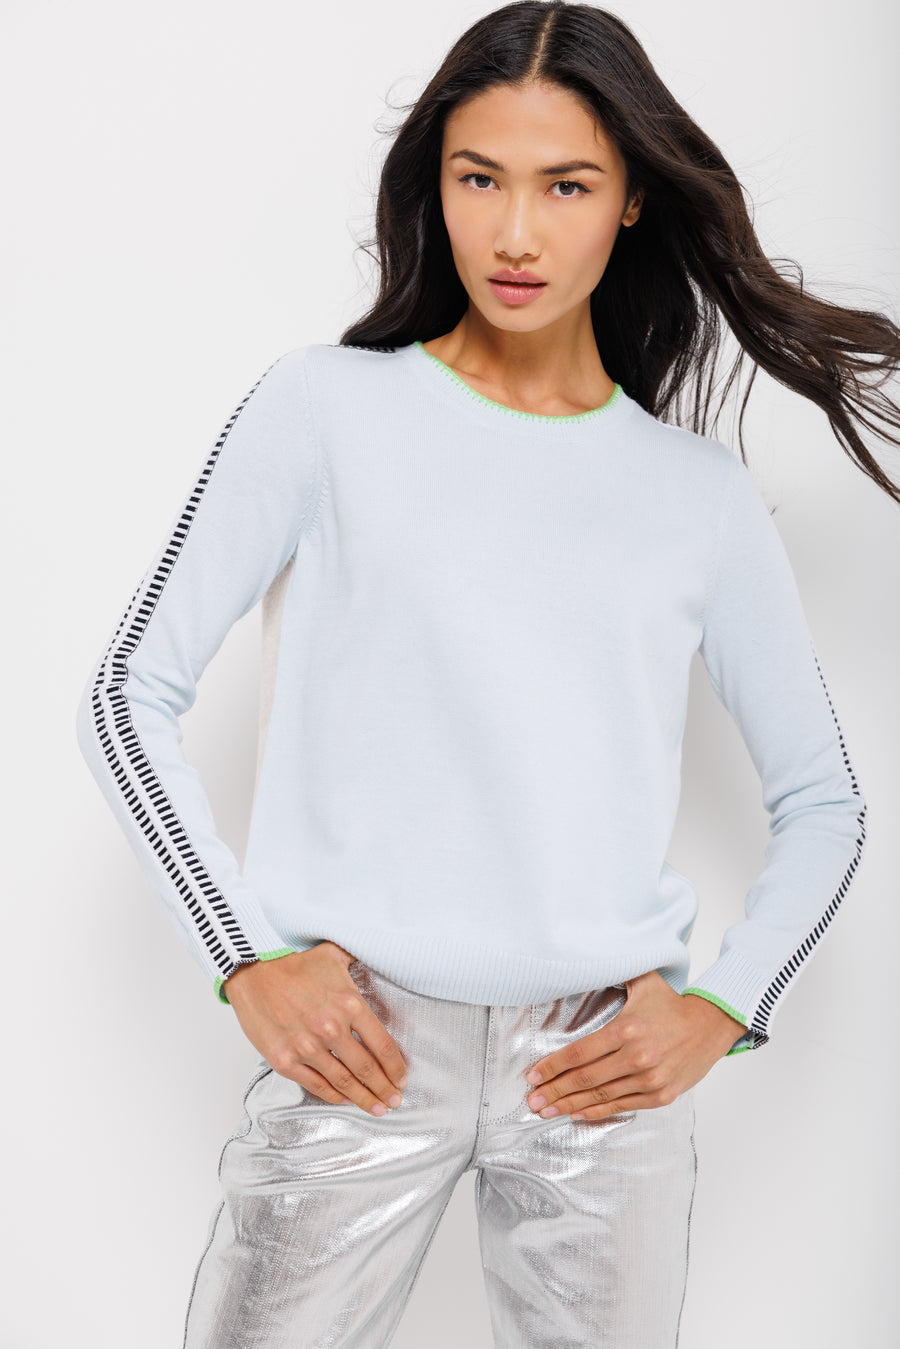 Lisa Todd On Track Sweater in Ice/Almond